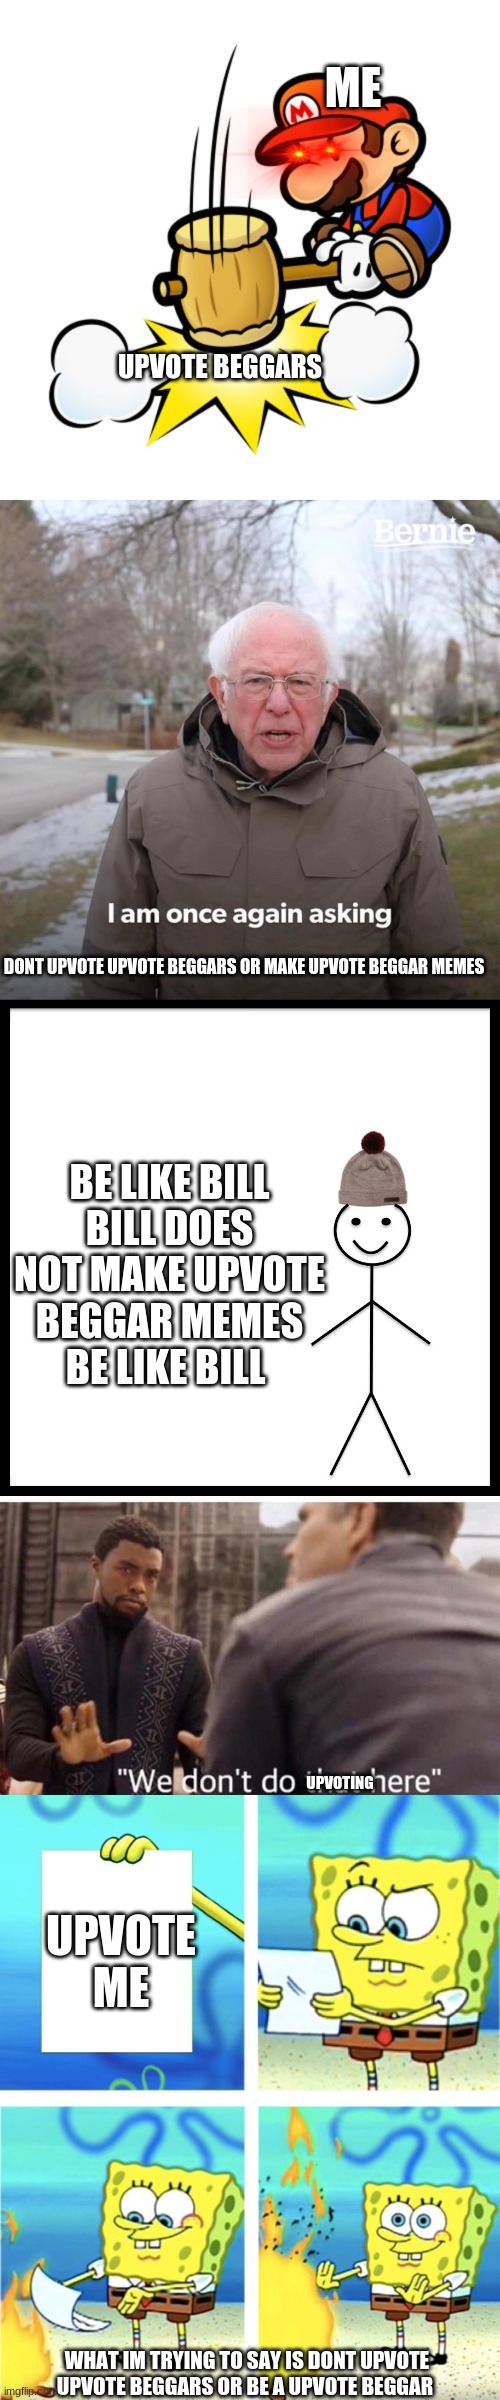 ME; UPVOTE BEGGARS; DONT UPVOTE UPVOTE BEGGARS OR MAKE UPVOTE BEGGAR MEMES; BE LIKE BILL
BILL DOES NOT MAKE UPVOTE BEGGAR MEMES
BE LIKE BILL; UPVOTE ME; UPVOTING; WHAT IM TRYING TO SAY IS DONT UPVOTE UPVOTE BEGGARS OR BE A UPVOTE BEGGAR | image tagged in memes,mario hammer smash,bernie i am once again asking for your support,be like bill,we dont do that here,upvote beggar stoppers | made w/ Imgflip meme maker